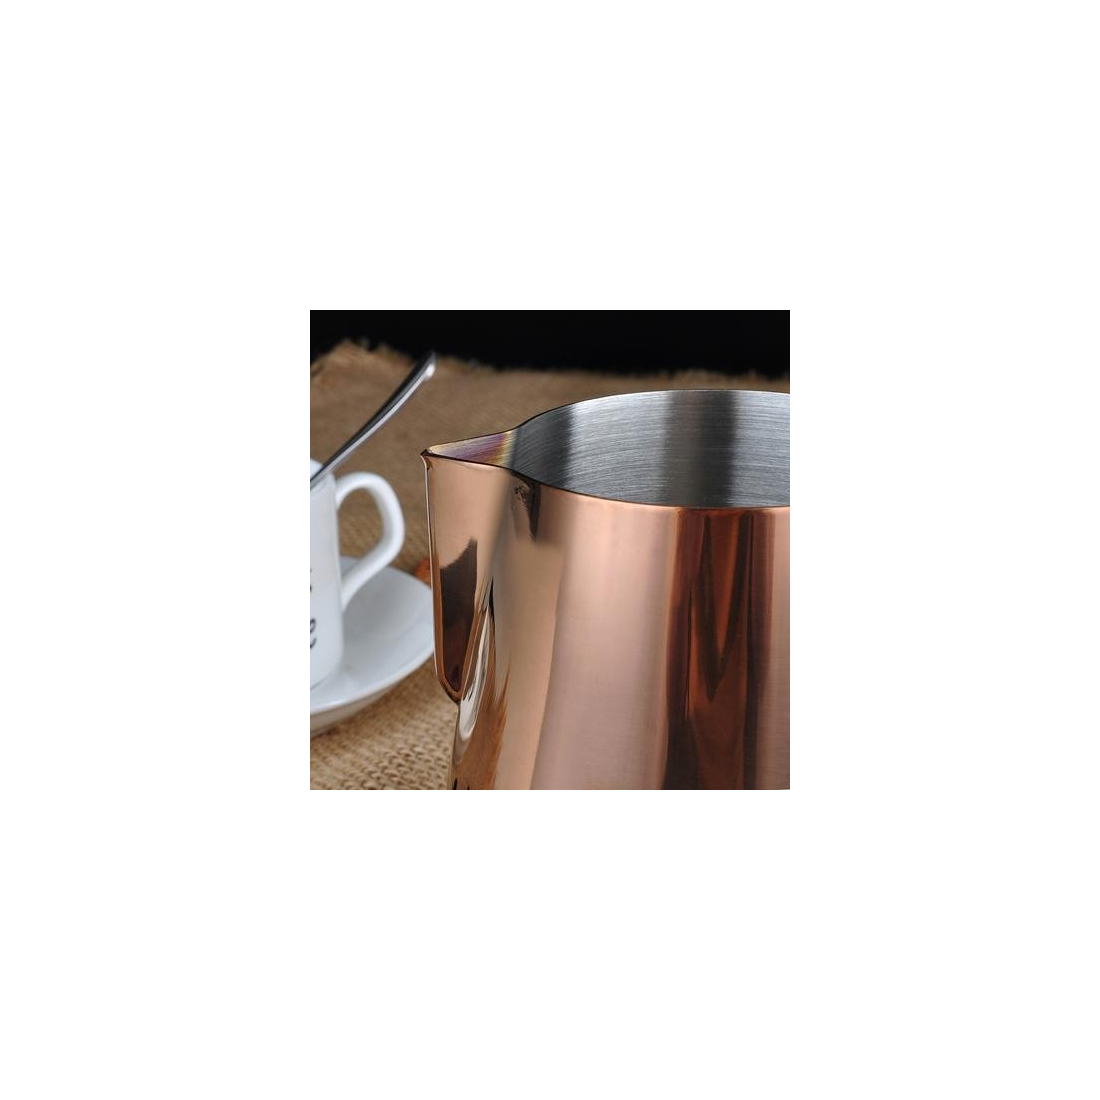 Barista Space (F15) Stainless Steel Rose Gold Milk Pitcher 350ml|mkayn|مكاين